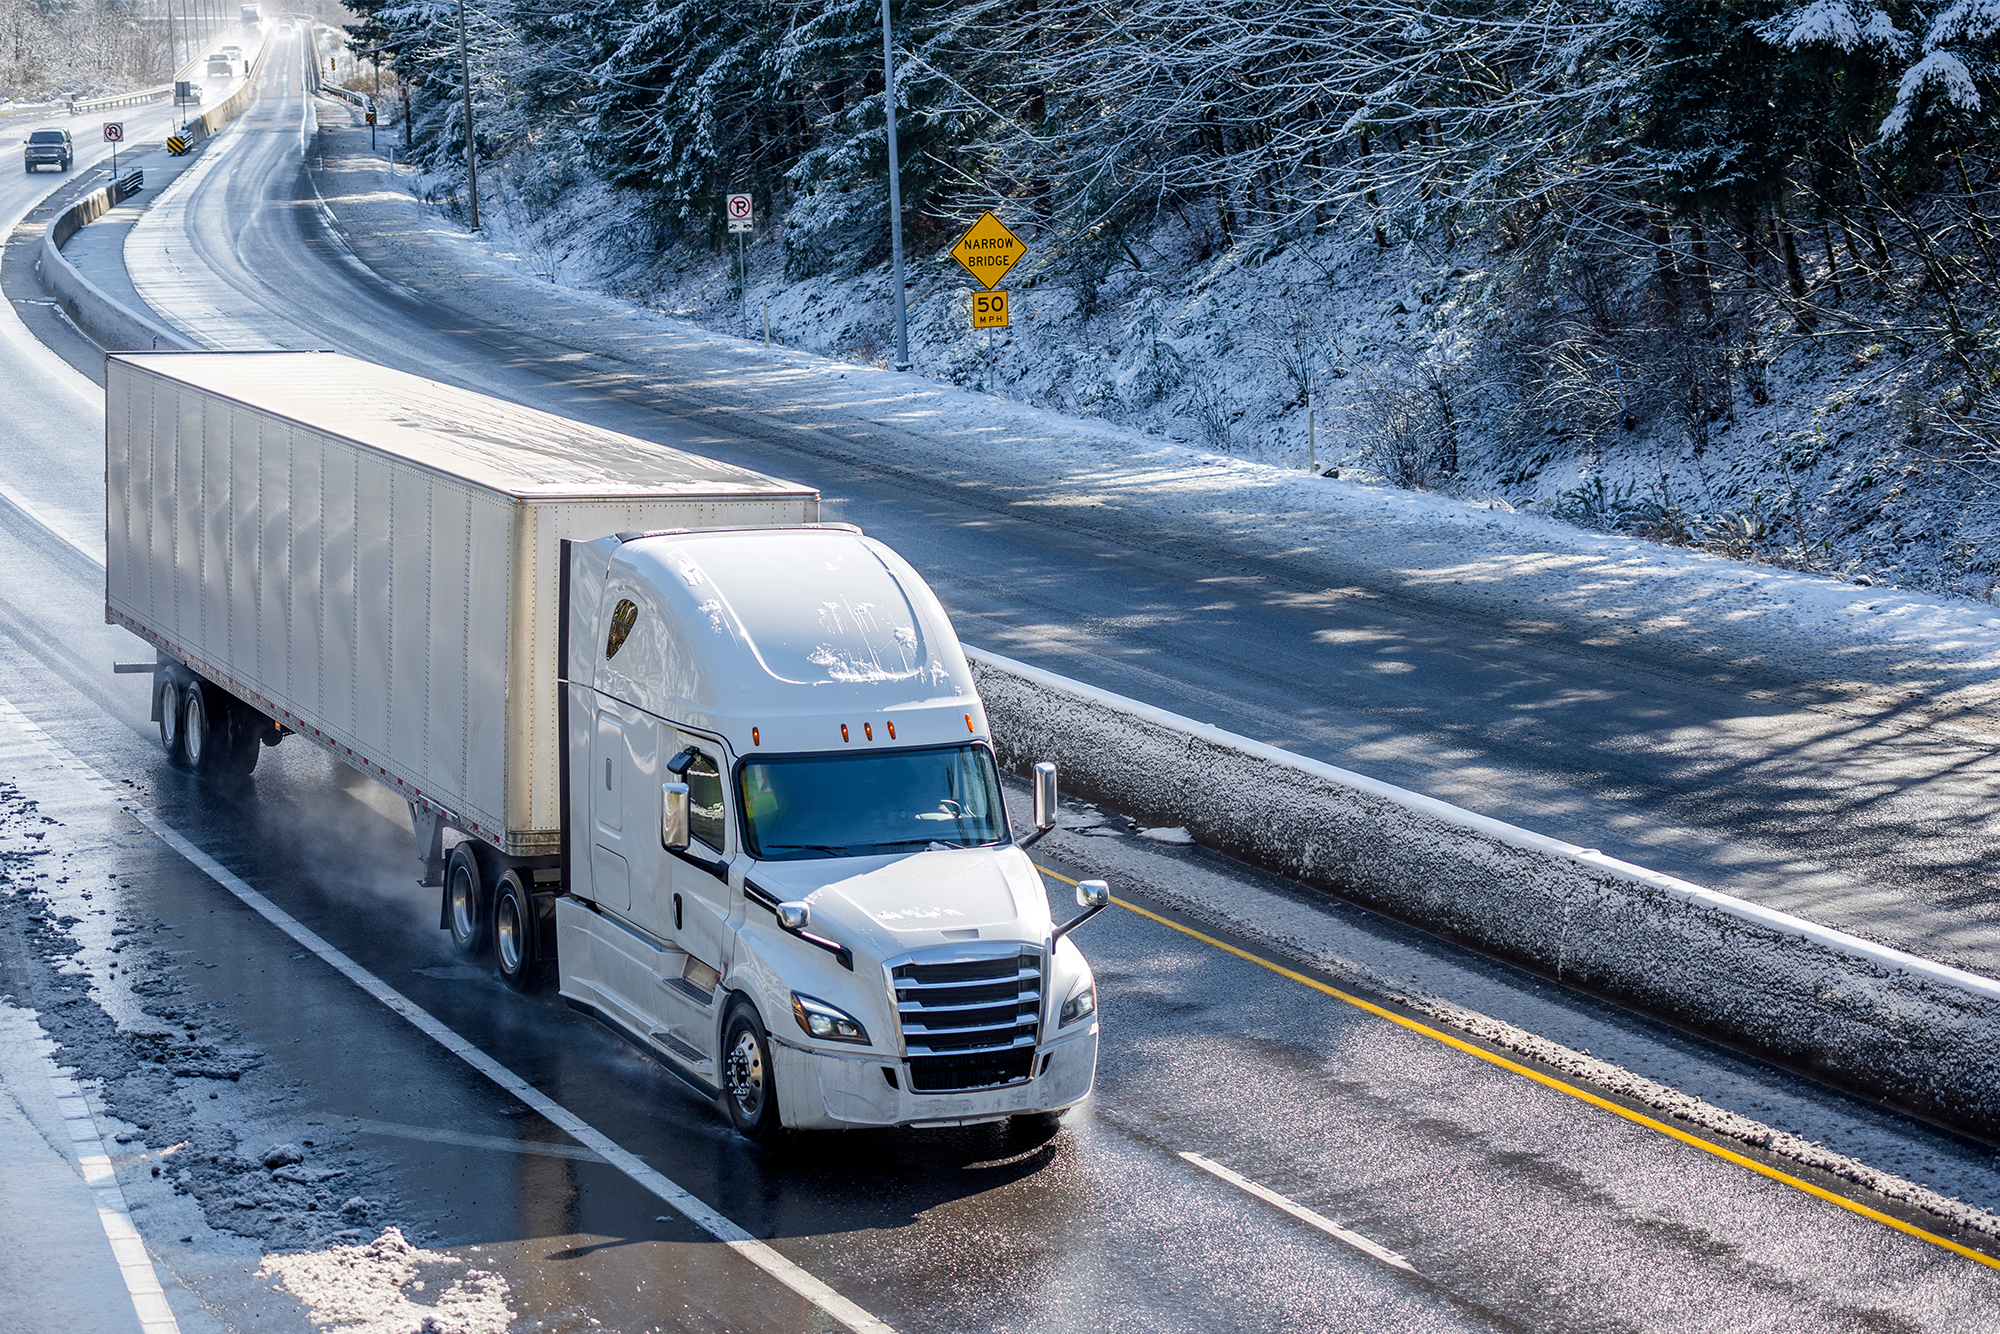 Winter Driving Tips for Truckers: An 18-wheeler driving on a snow-covered road.